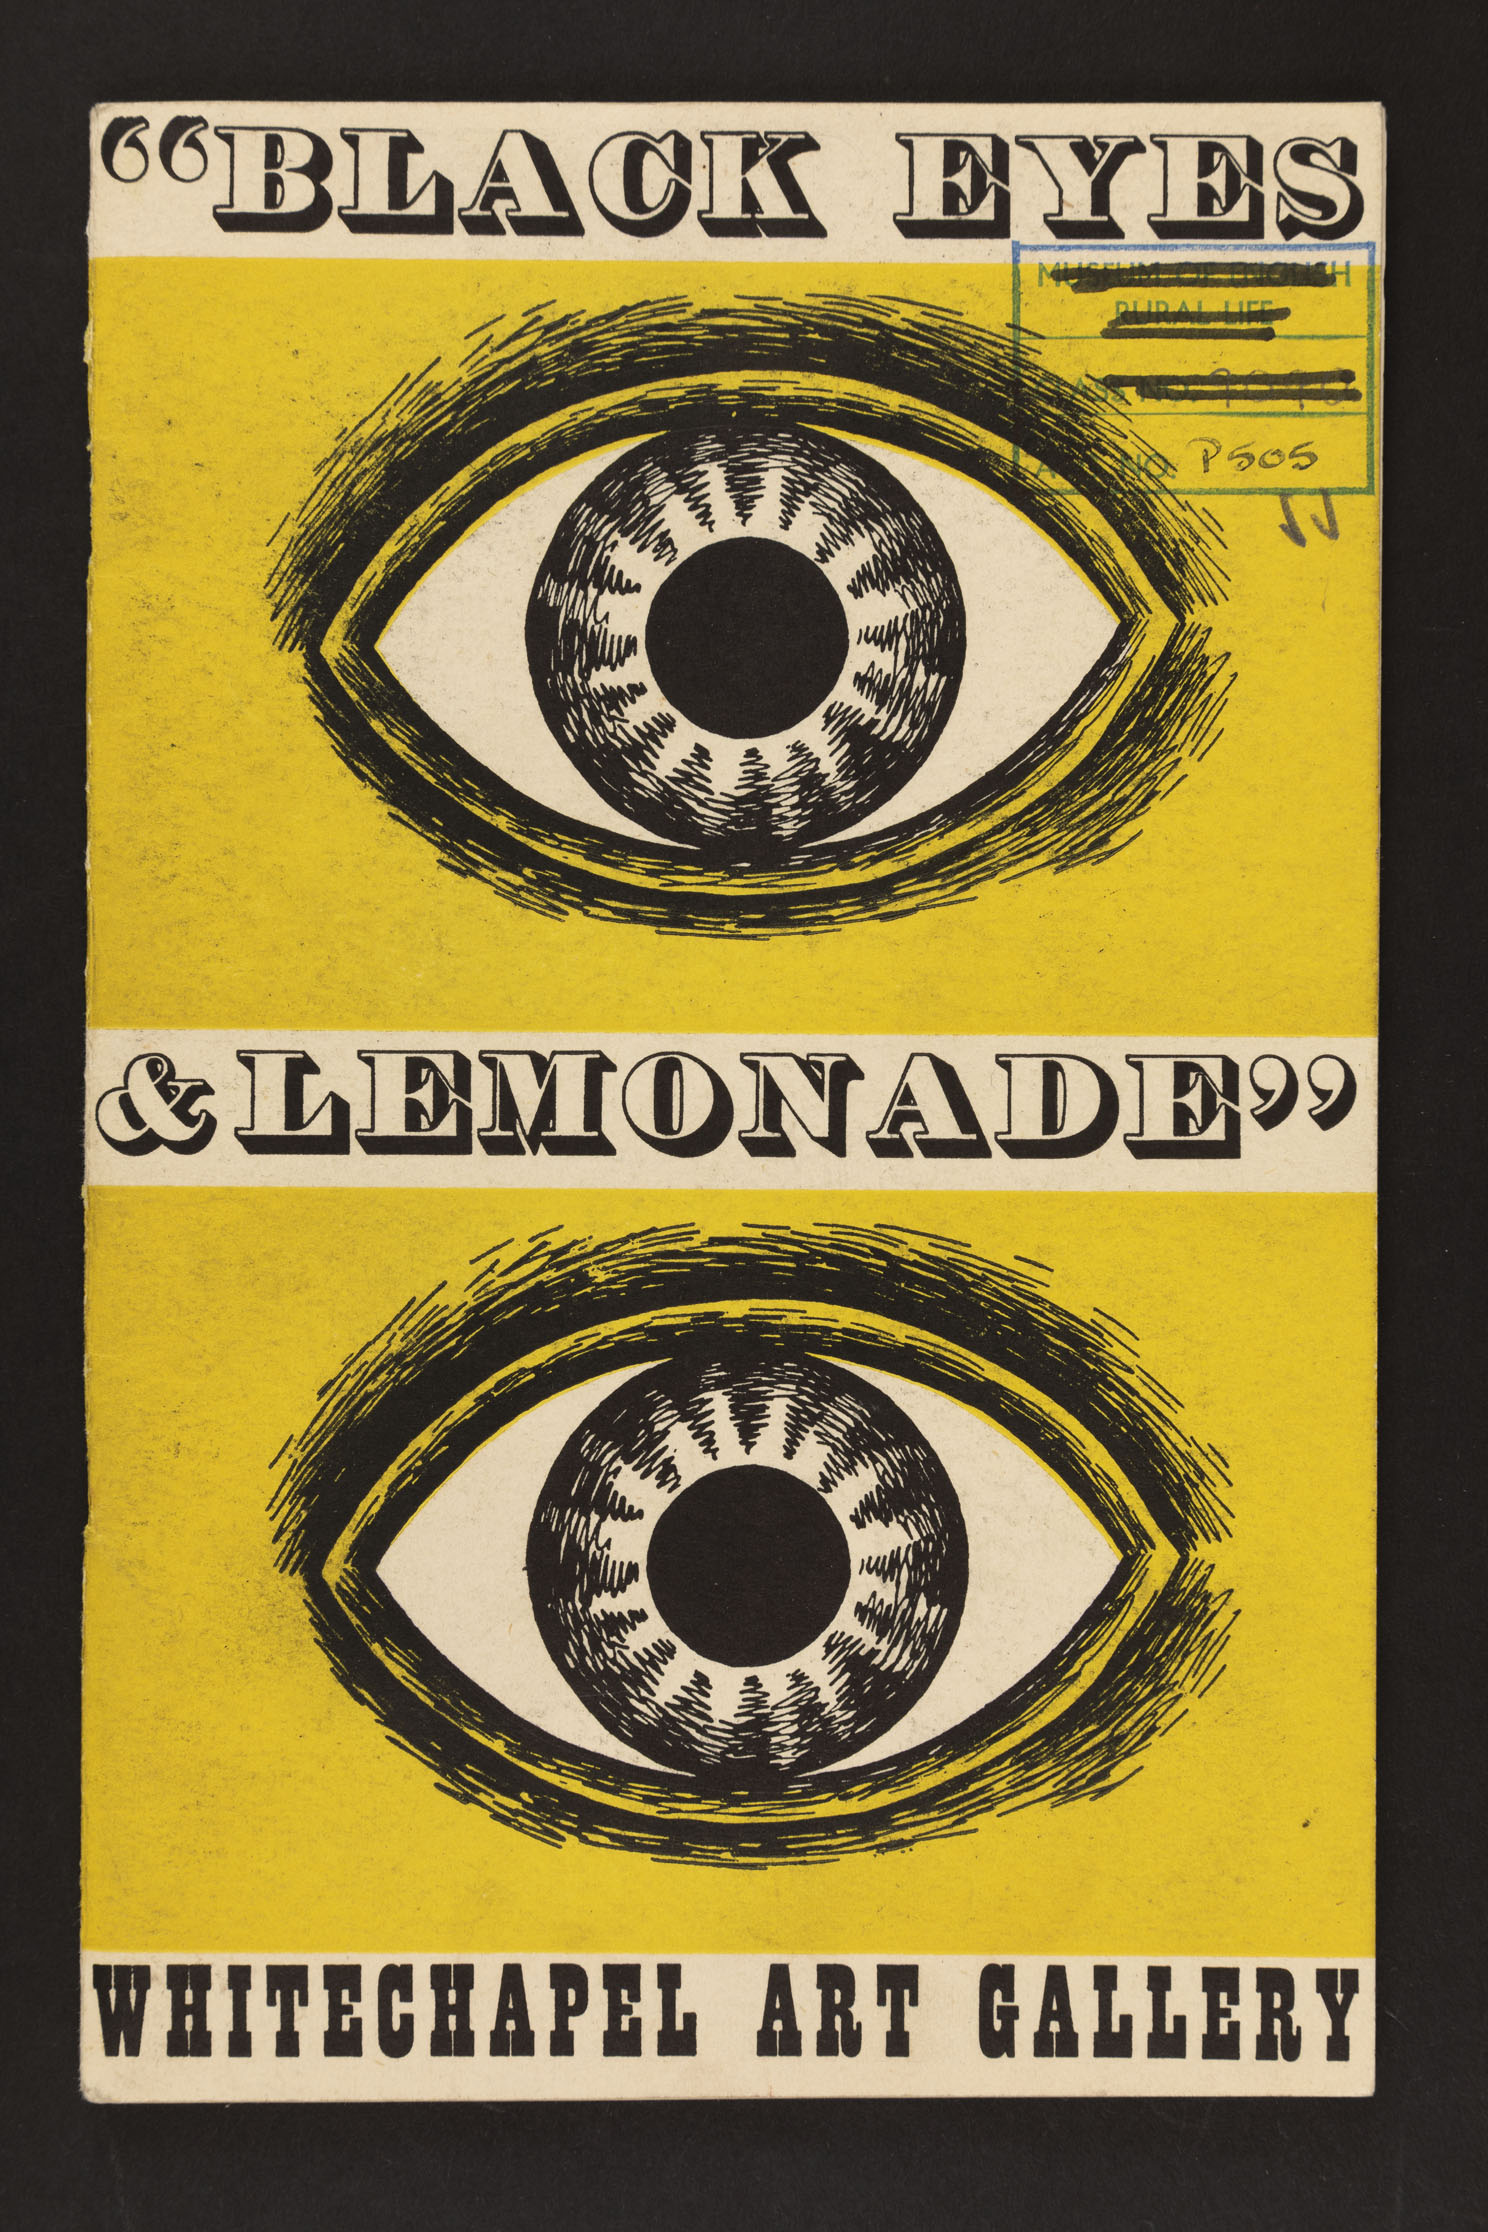 This striking image featured on the cover of the 1951 Black Eyes and Lemonade programme. (University of Reading Special Collections, Great Exh. Coll. 12)